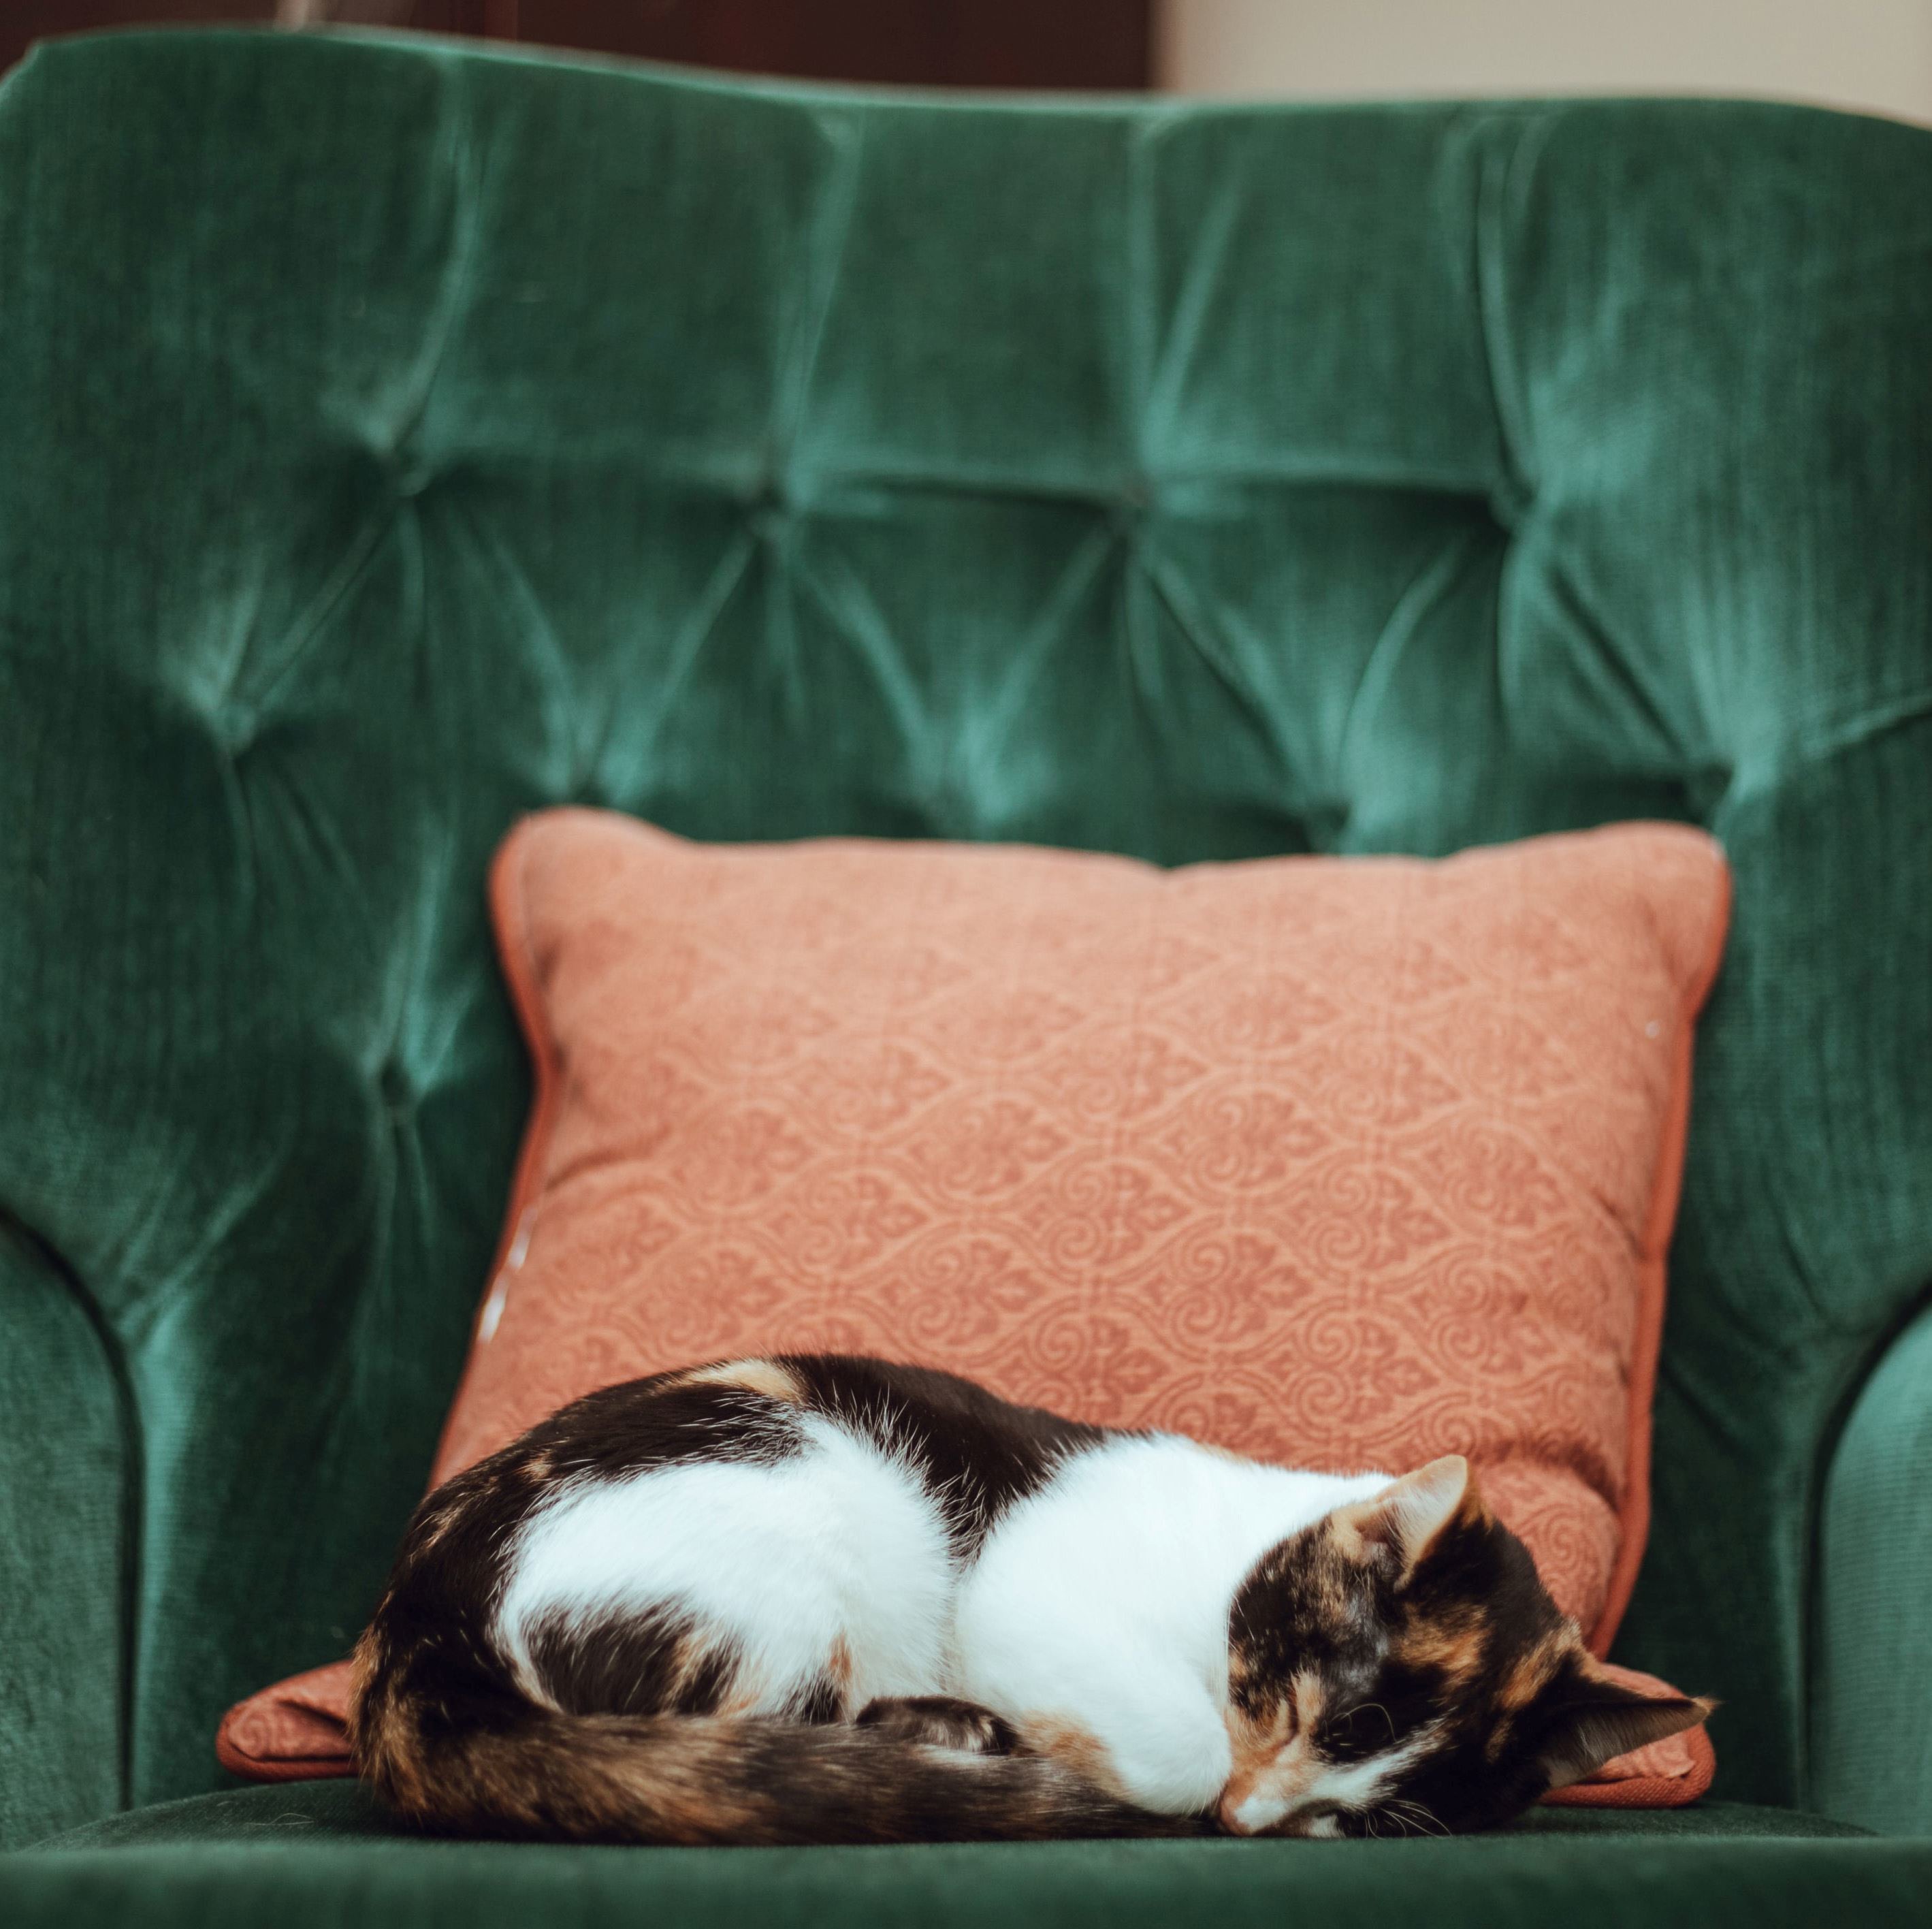 Tortoiseshell-and-white cat curled up asleep on velvet green armchair with orange patterned cushion